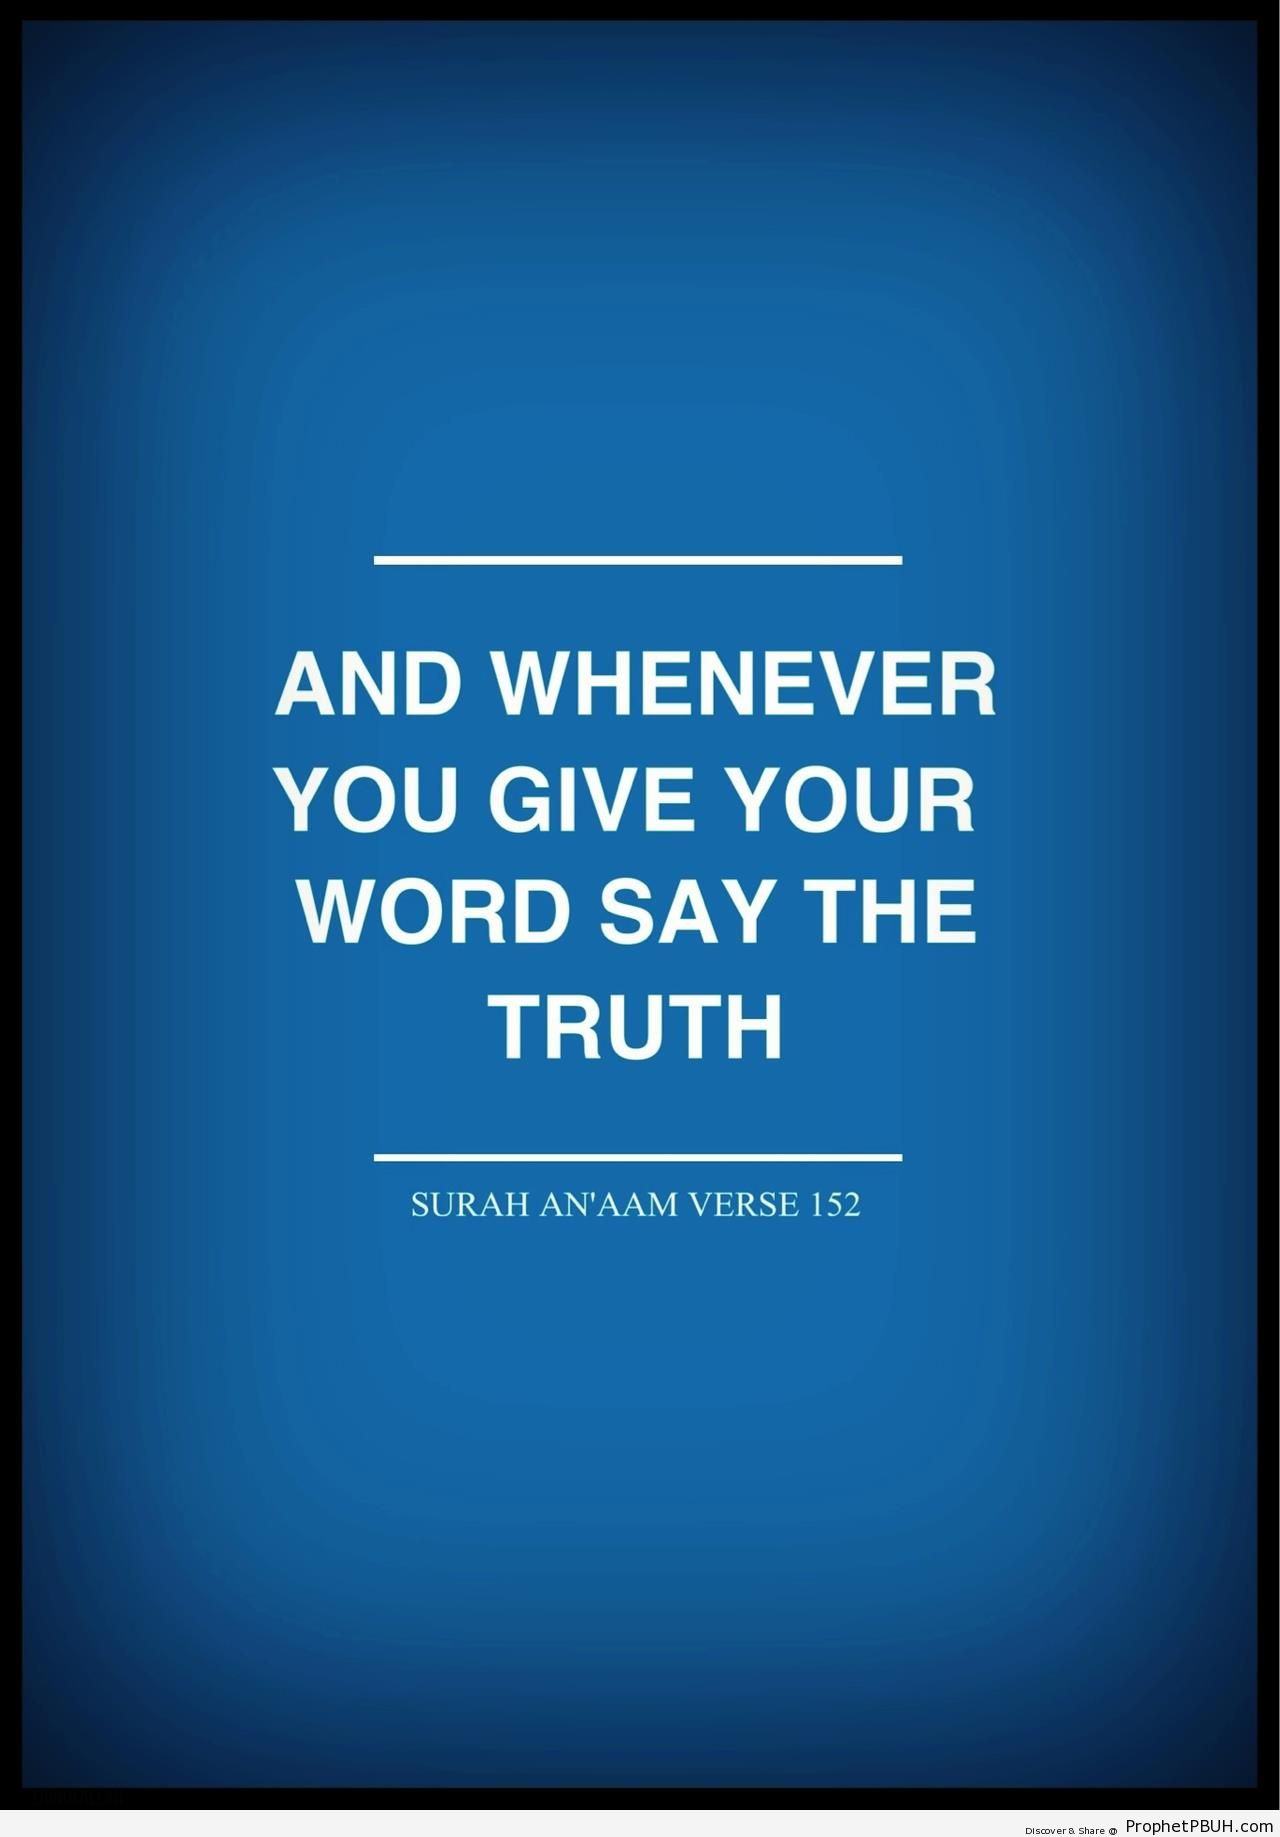 Quran 6-152 - Quran 6-152 (And whenever you give your word say the truth) 